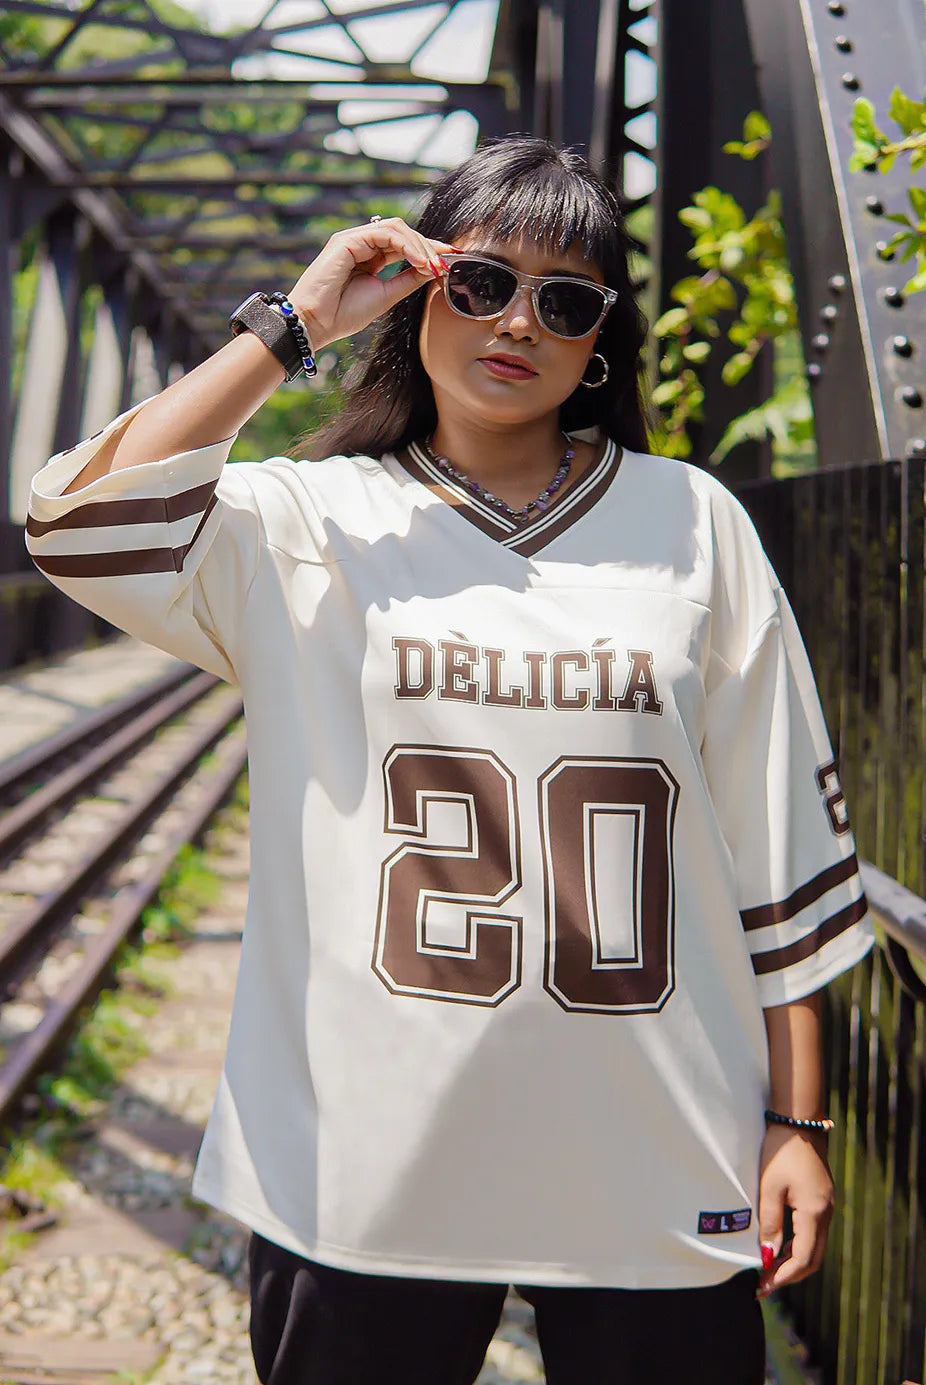 Jersey "20" Edition in Cream